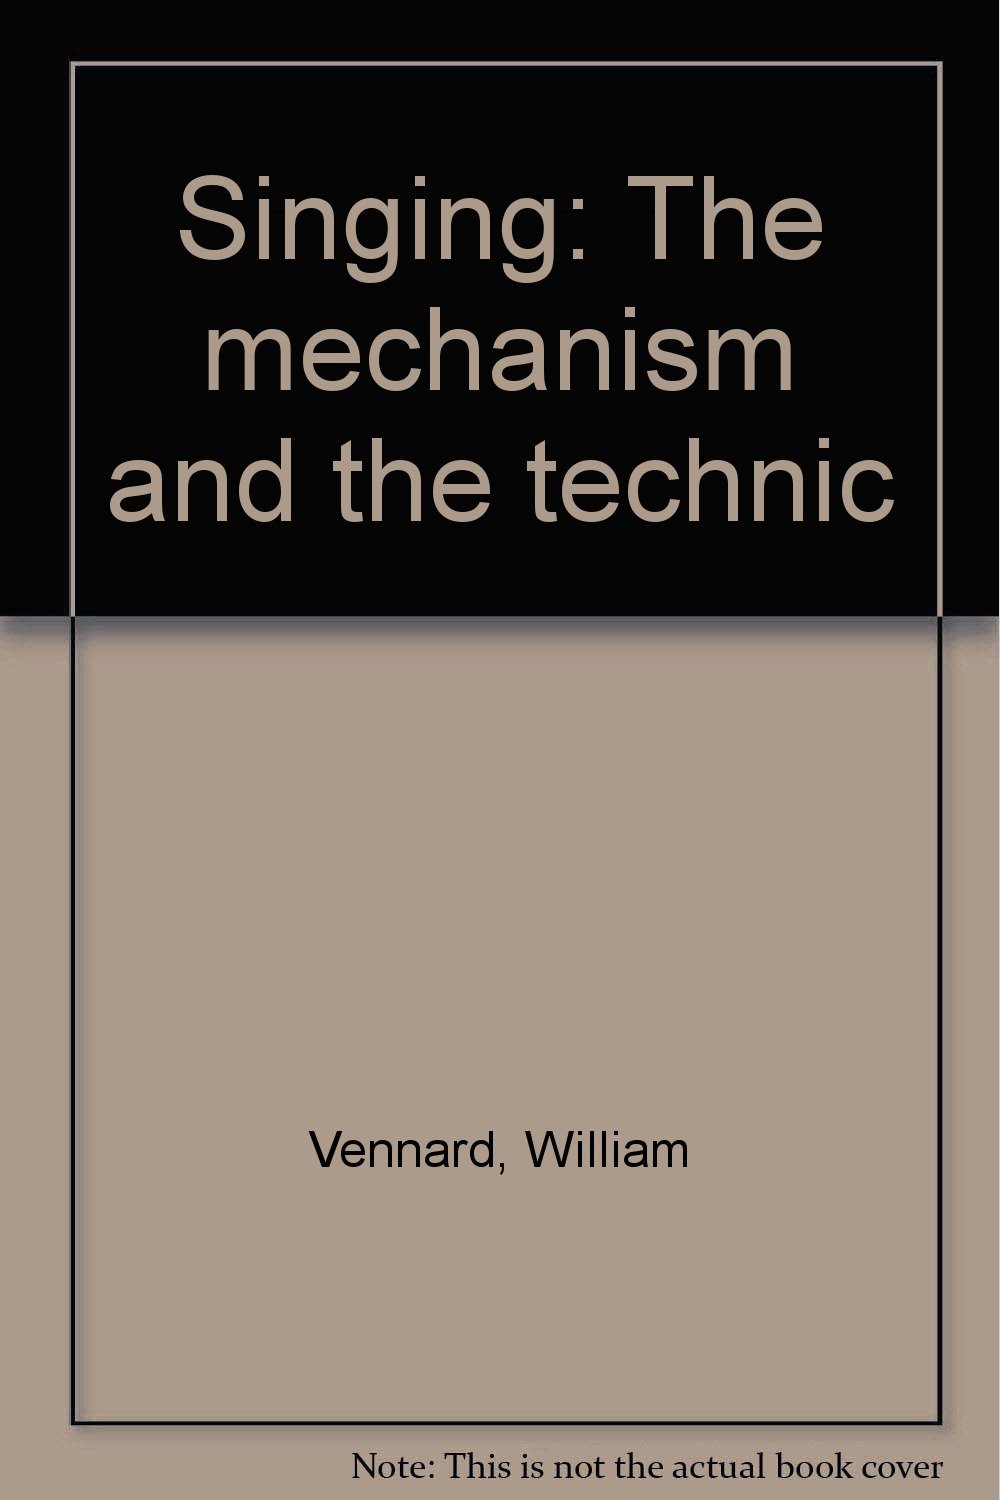 Singing: The mechanism and the technic